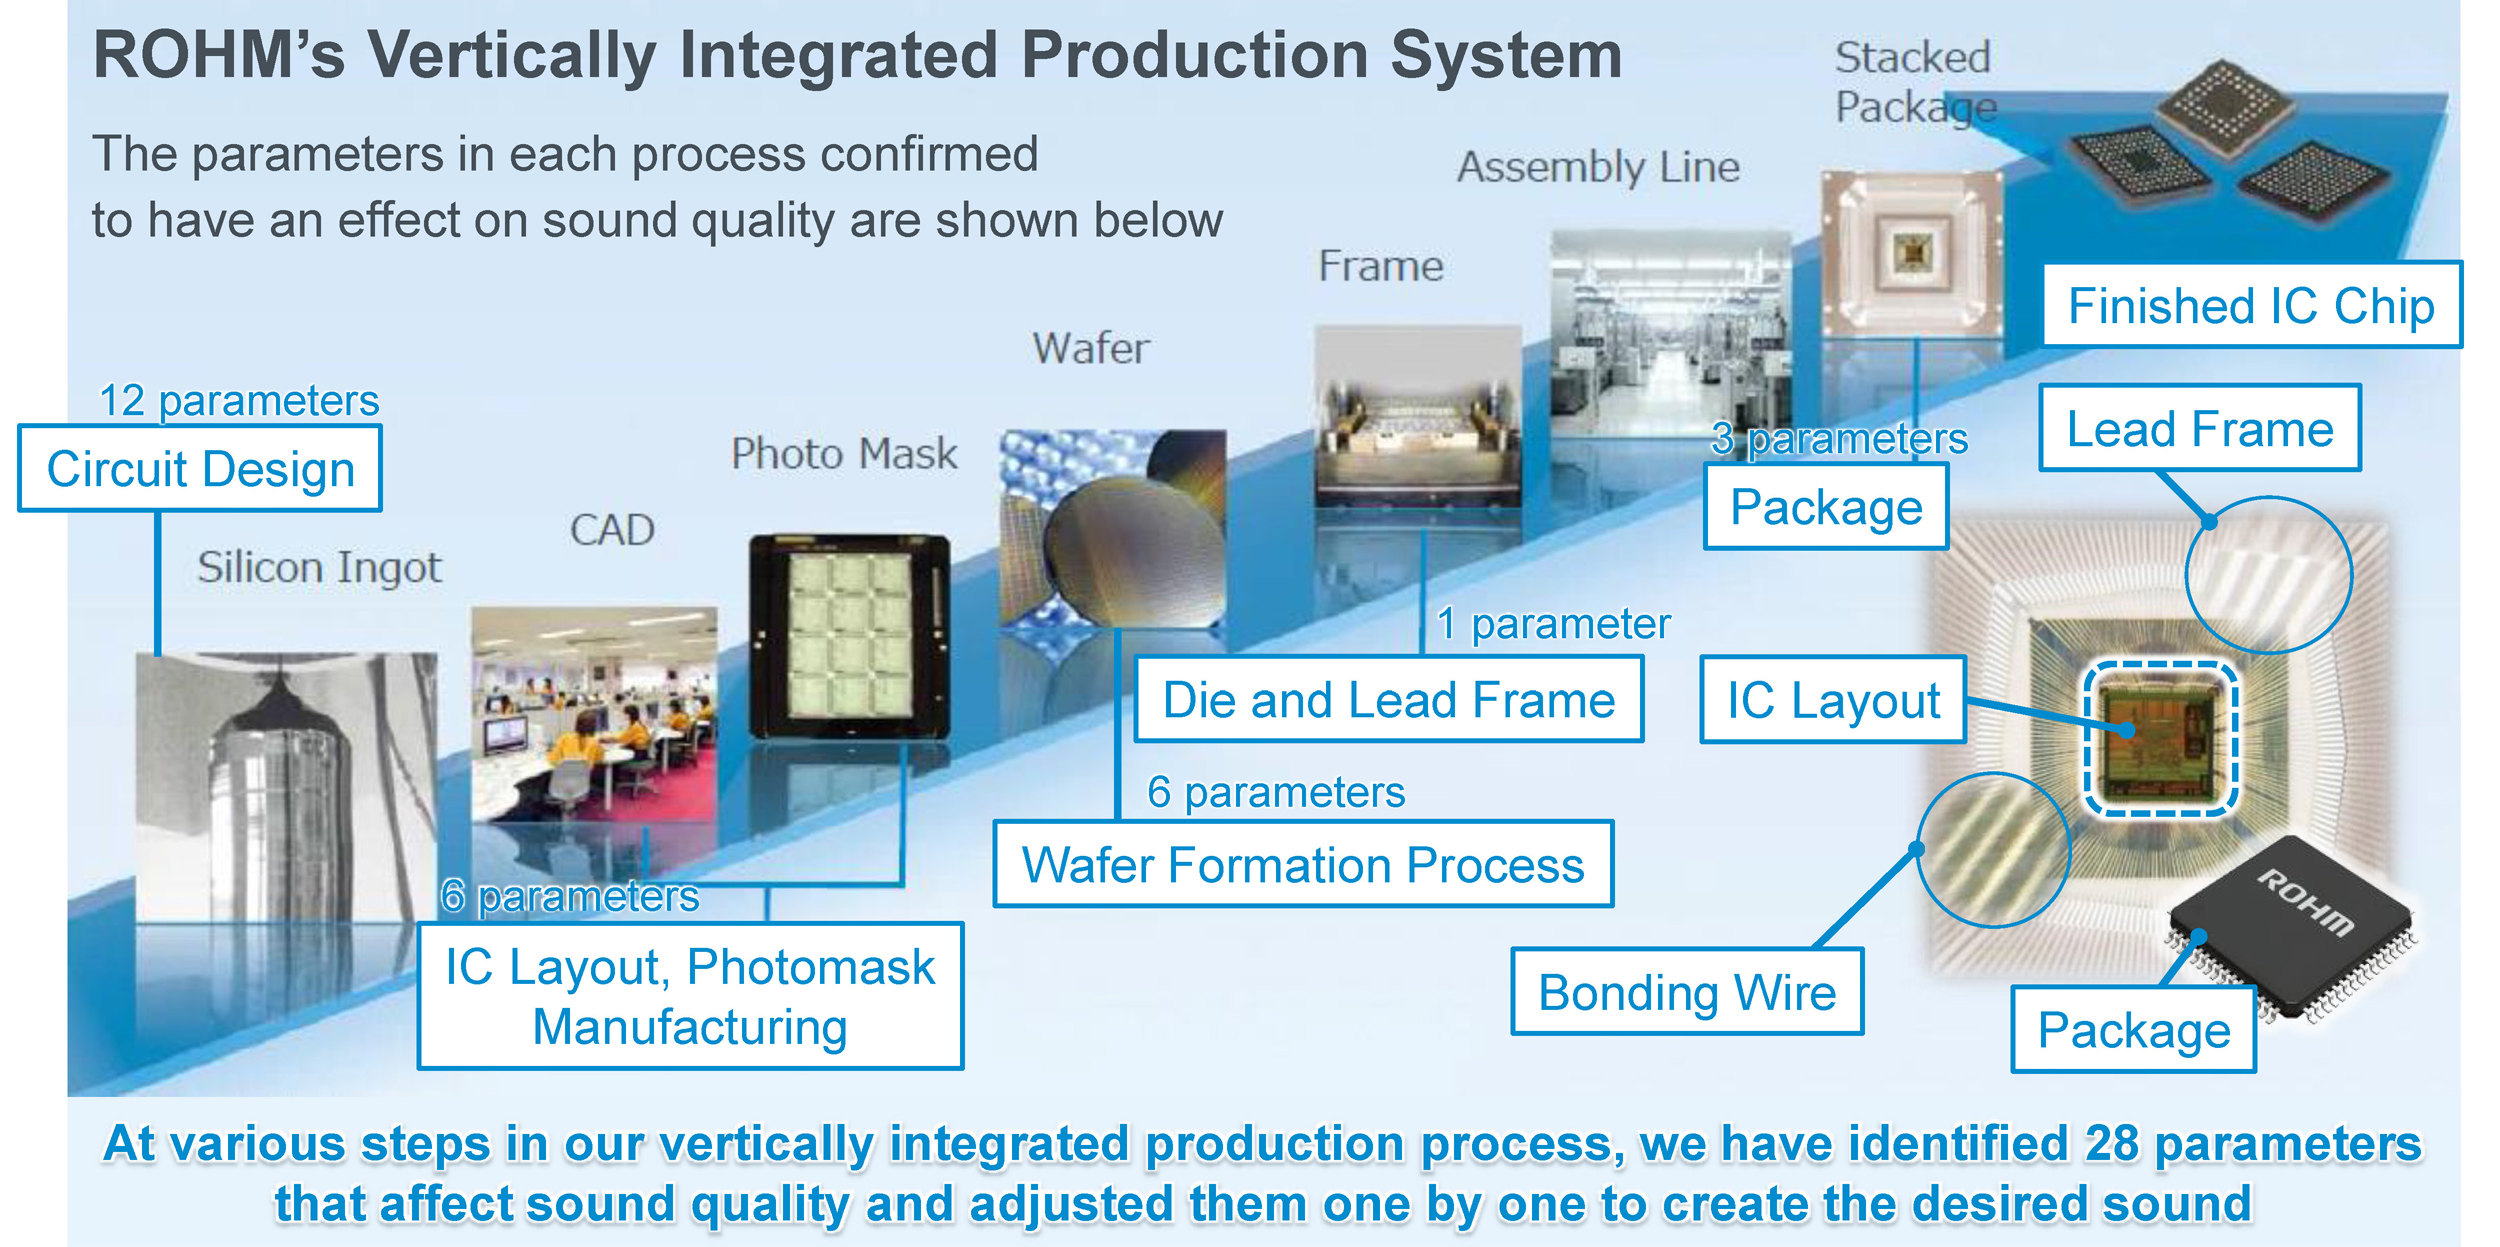 ROHM's Vertically Integrated Production System